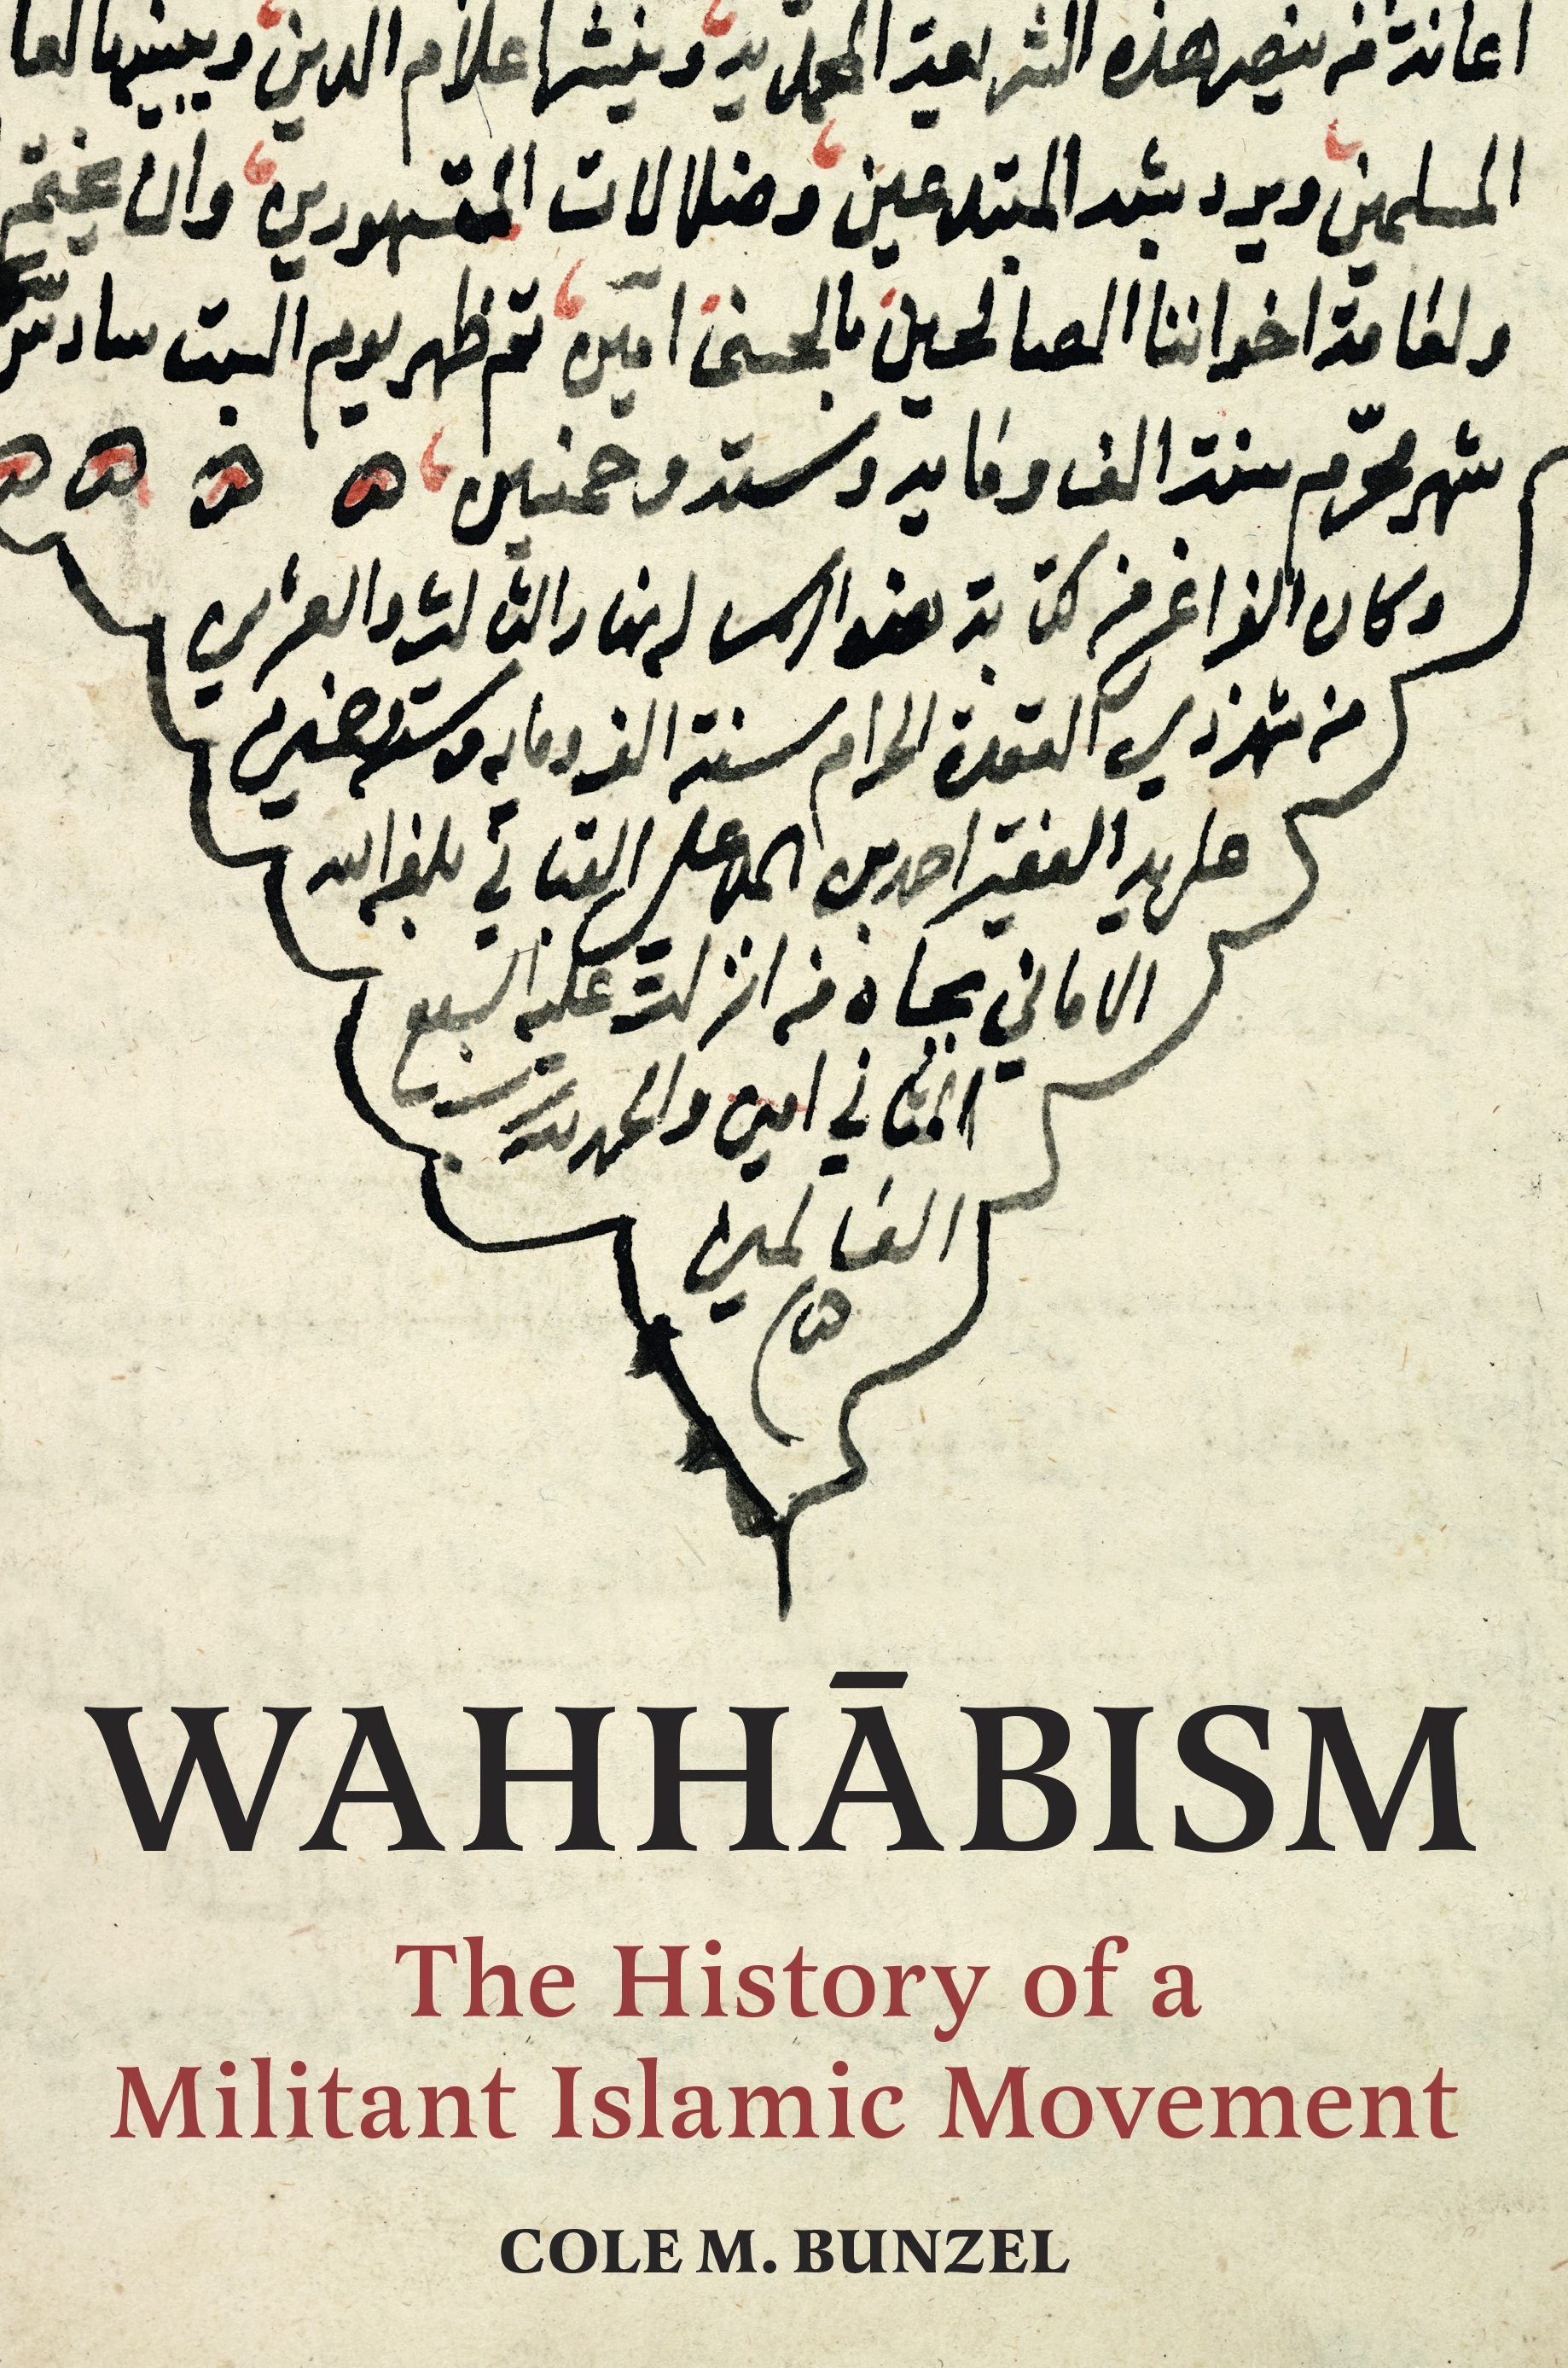 Wahhābism: The History of a Militant Islamic Movement